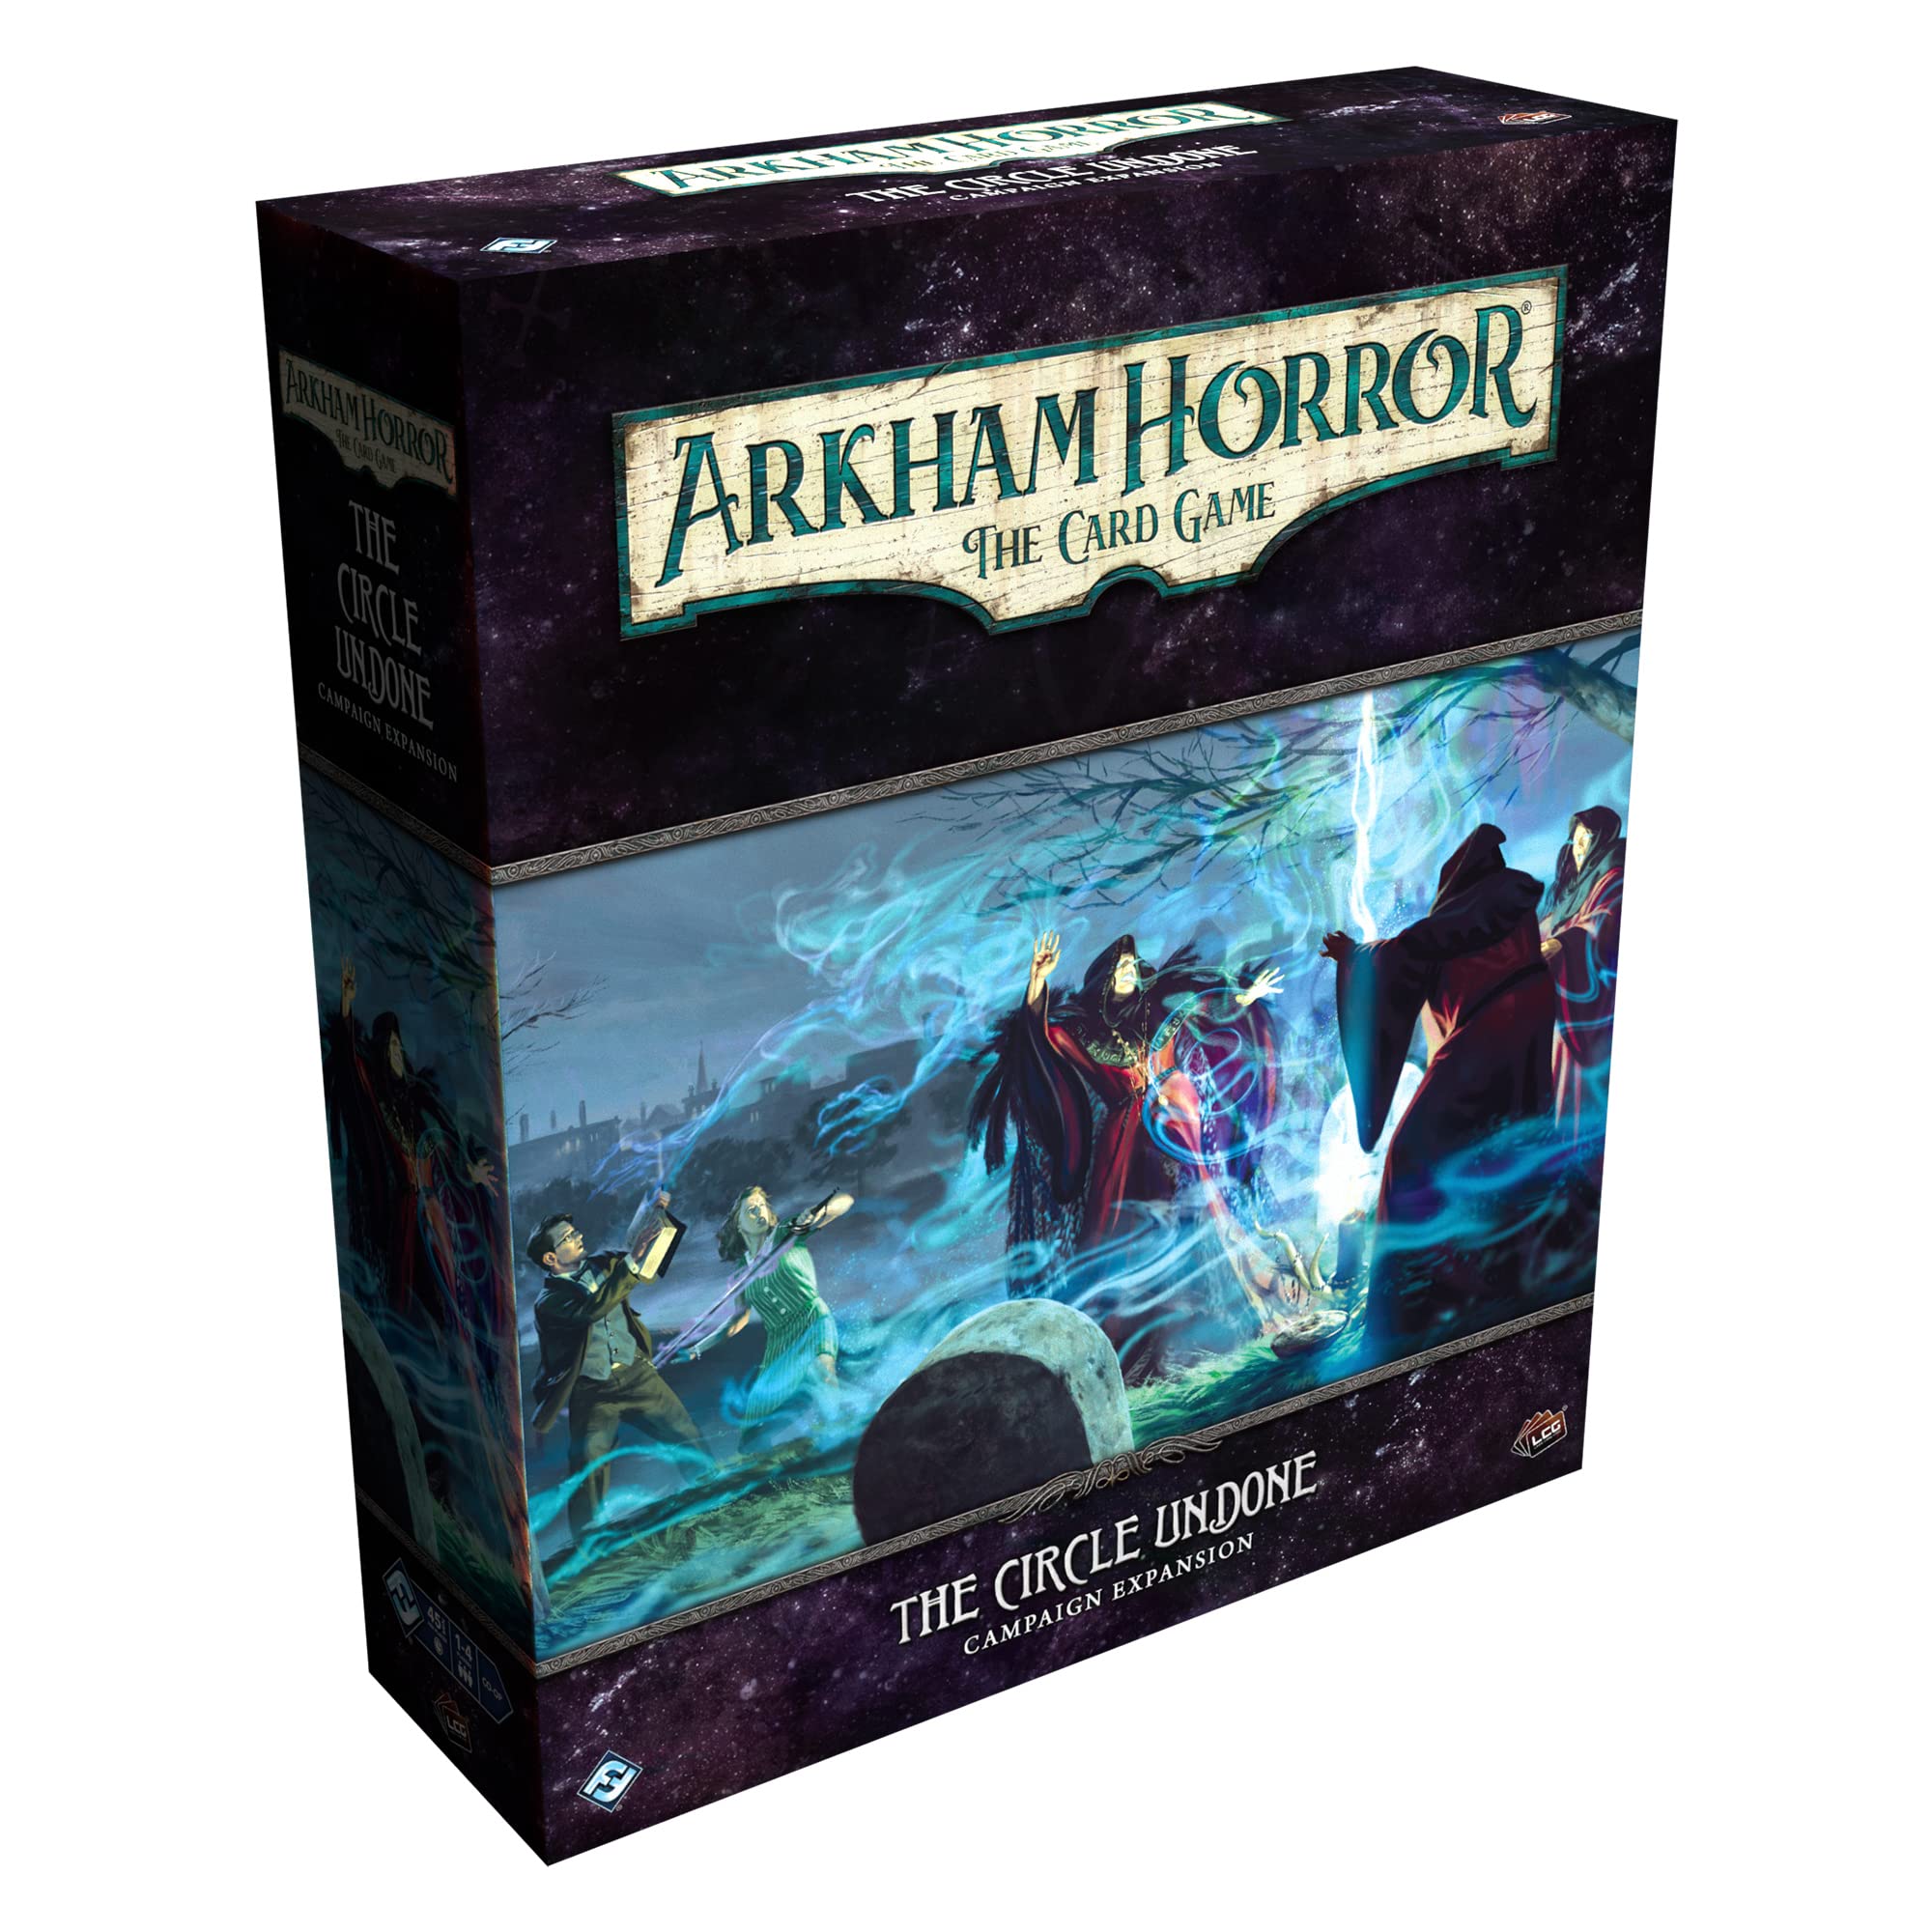 Fantasy Flight Games Arkham Horror The Card Game The Circle Undone Campaign Expansion | Horror Game | Mystery Game | Cooperative Card Game | Ages 14+ | 1-4 Players | Avg. Playtime 1-2 Hours | Made